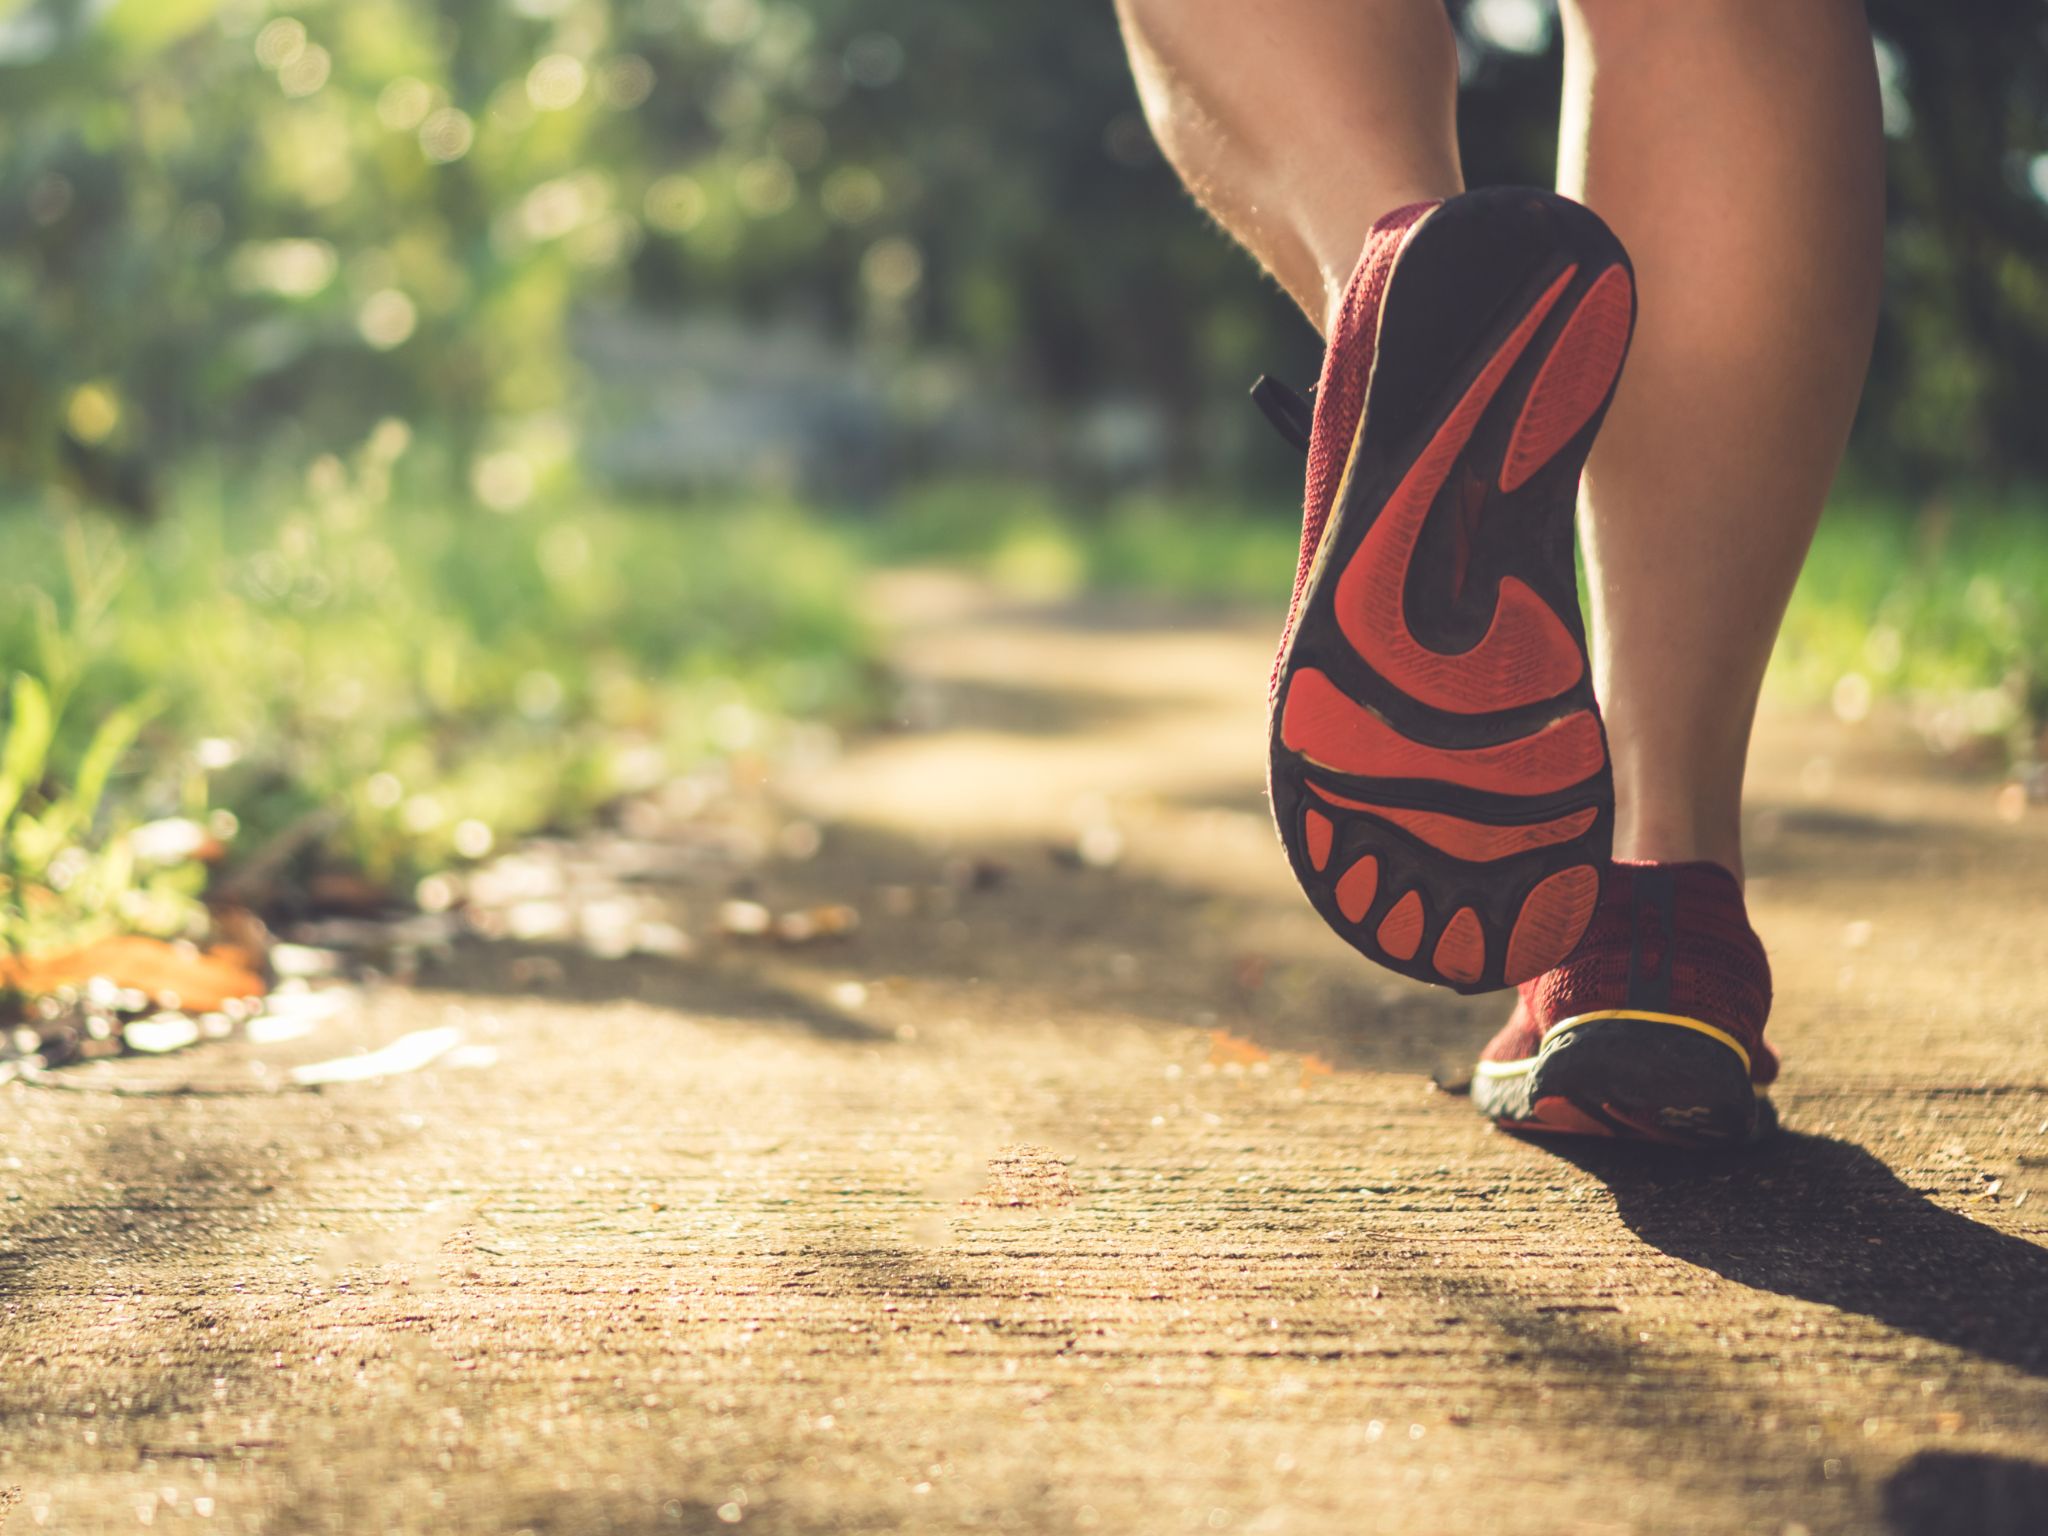 The remarkable health benefits of walking